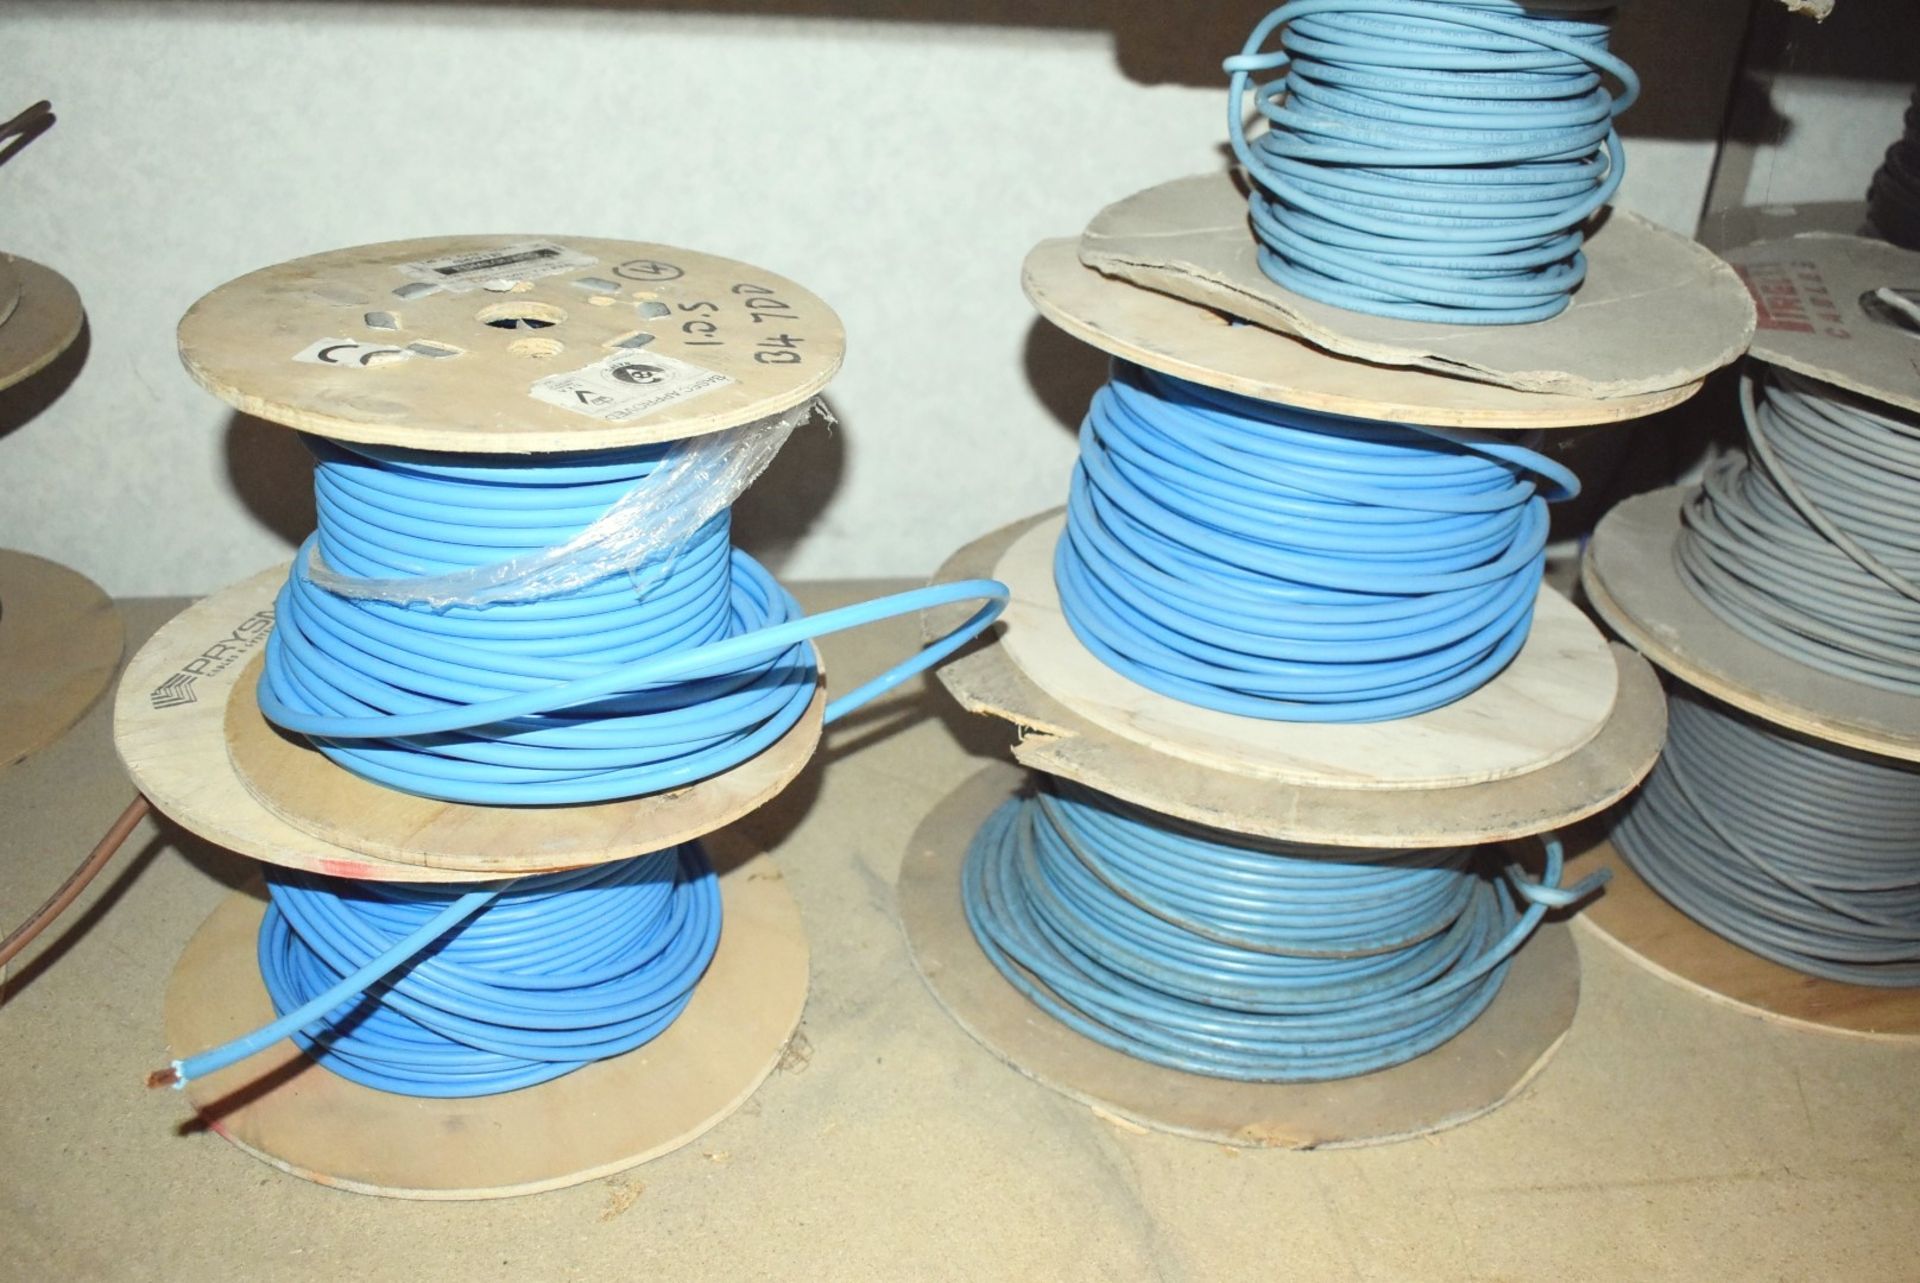 26 x Reels of Various Electrical Cable - Part Used Reels - Image 7 of 10